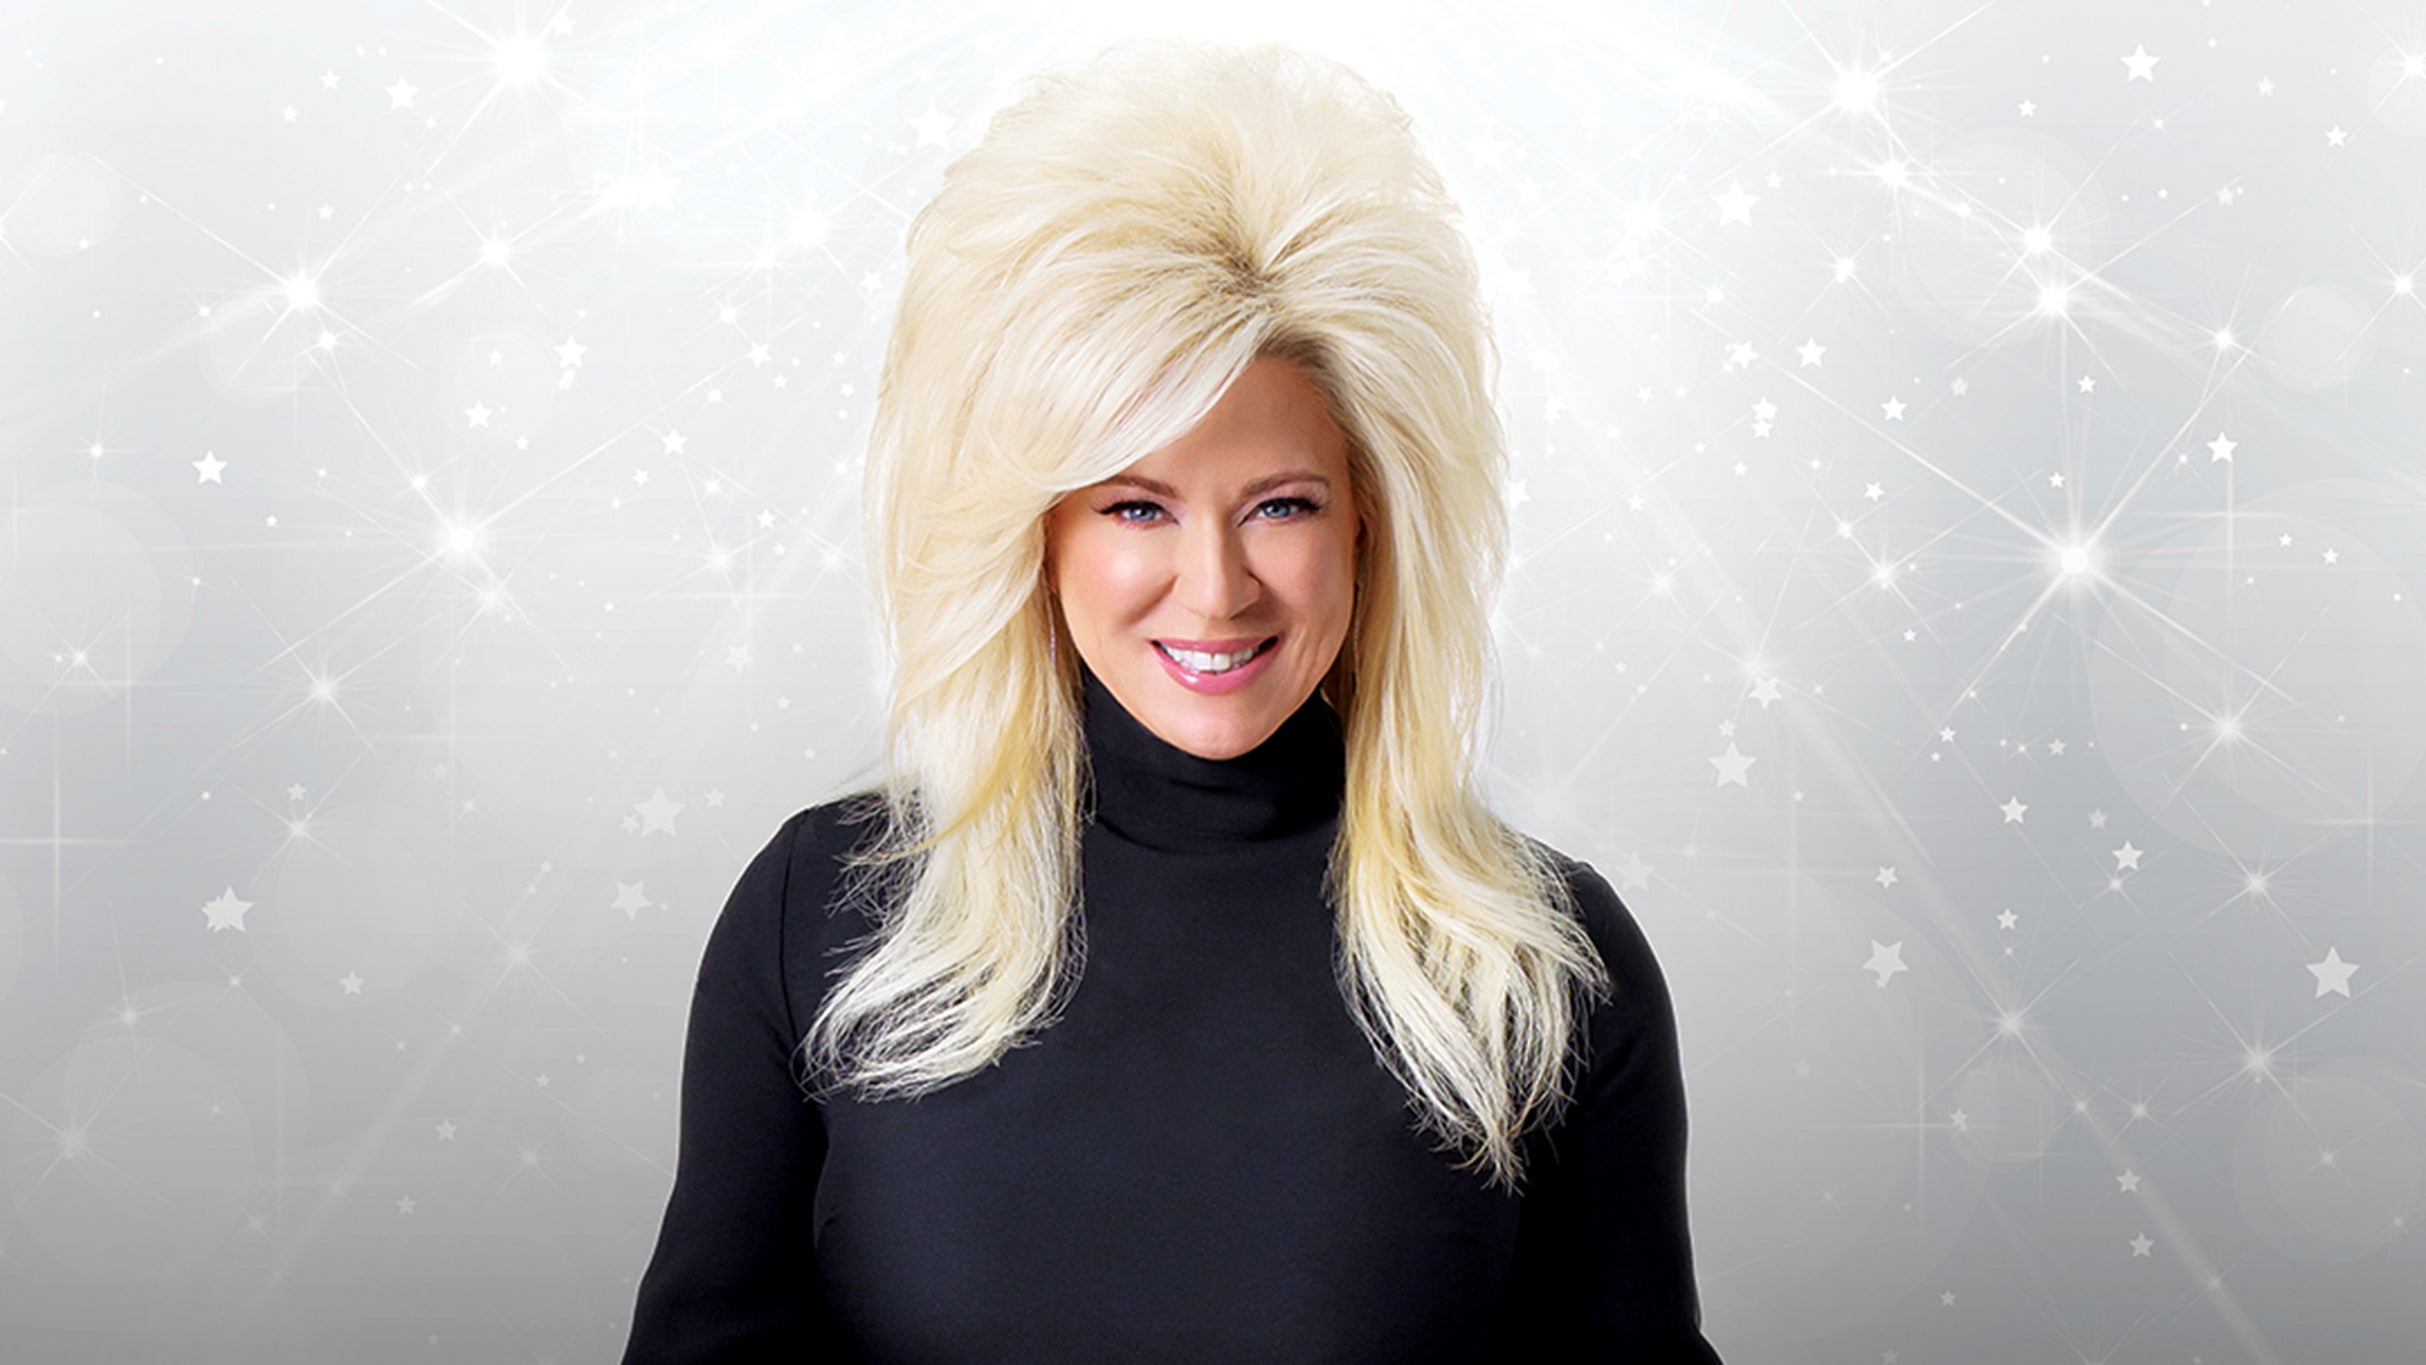 presale password for Theresa Caputo Live: The Experience face value tickets in Huntington